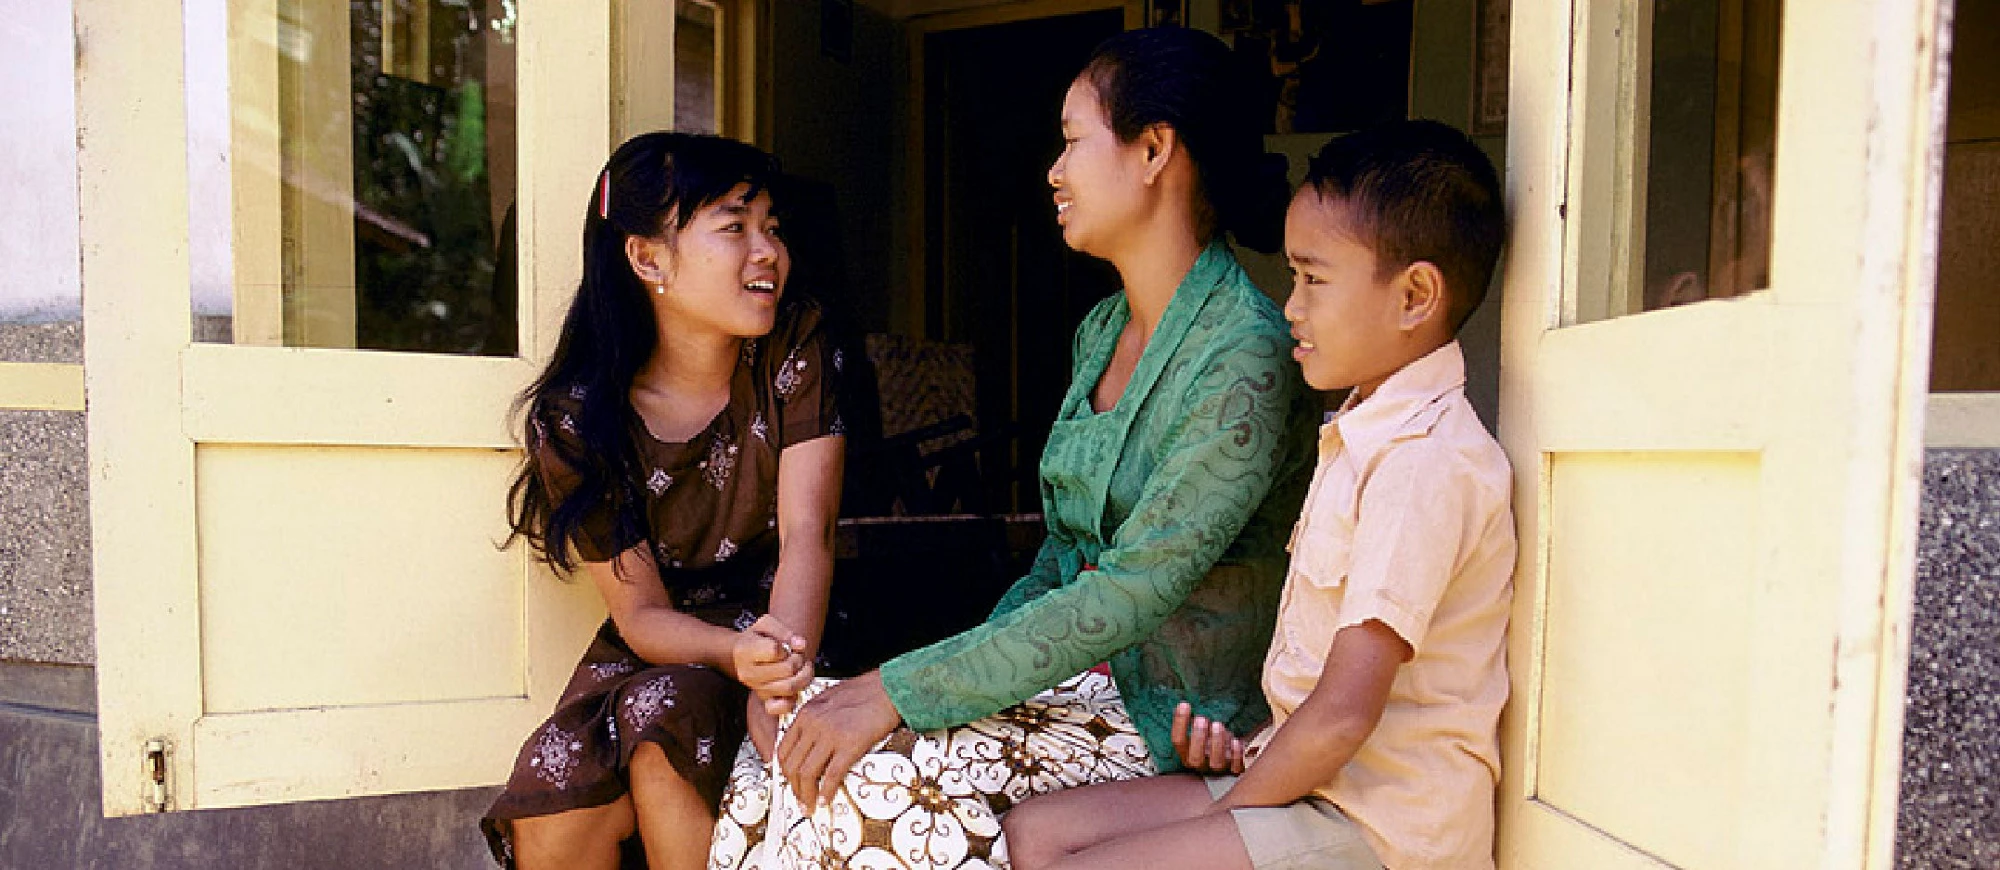 Around 40 percent of households in Indonesia receive regular social assistance programs. Photo: © Ray Witlin / World Bank